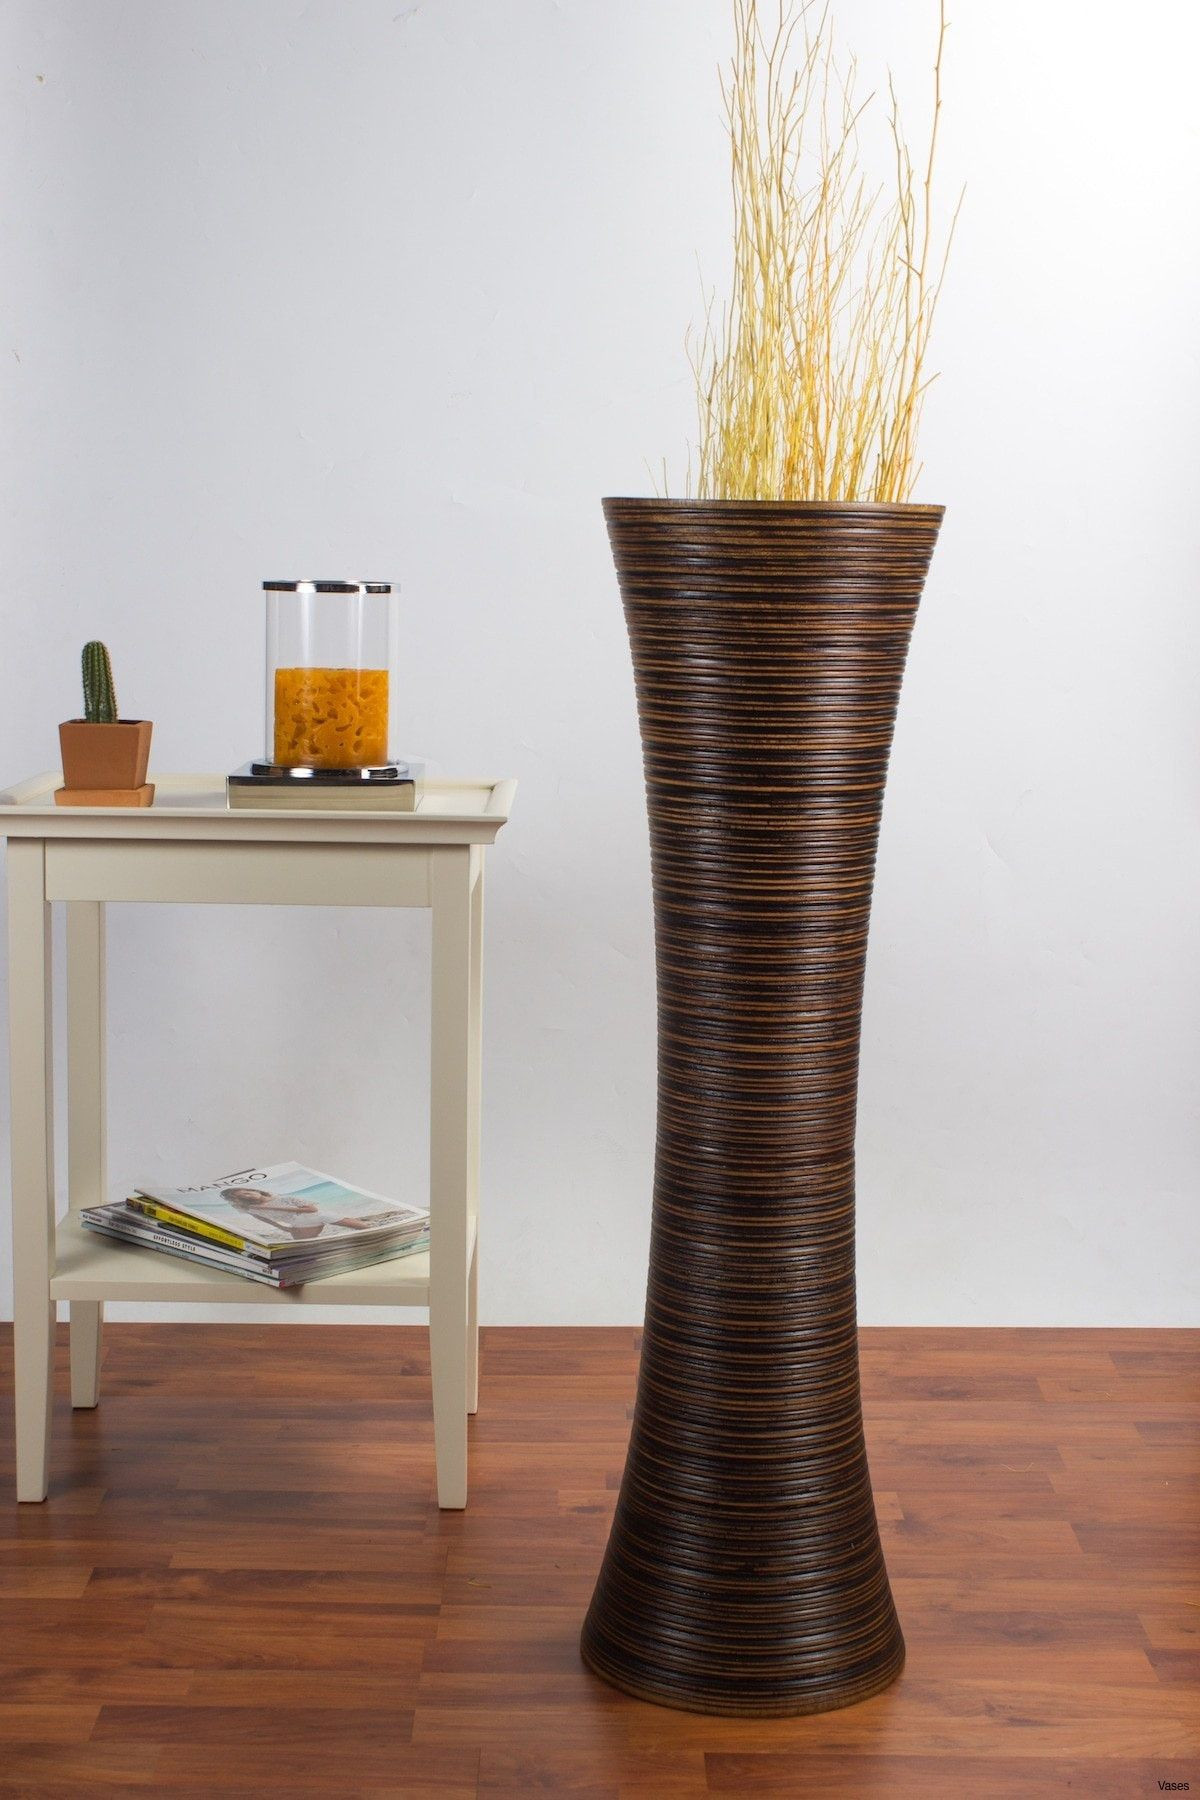 22 Great Tall Tin Flower Vases 2024 free download tall tin flower vases of tall decorative vases luxury decorative floor vases fresh d dkbrw intended for tall decorative vases luxury decorative floor vases fresh d dkbrw 5749 1h vases tall b